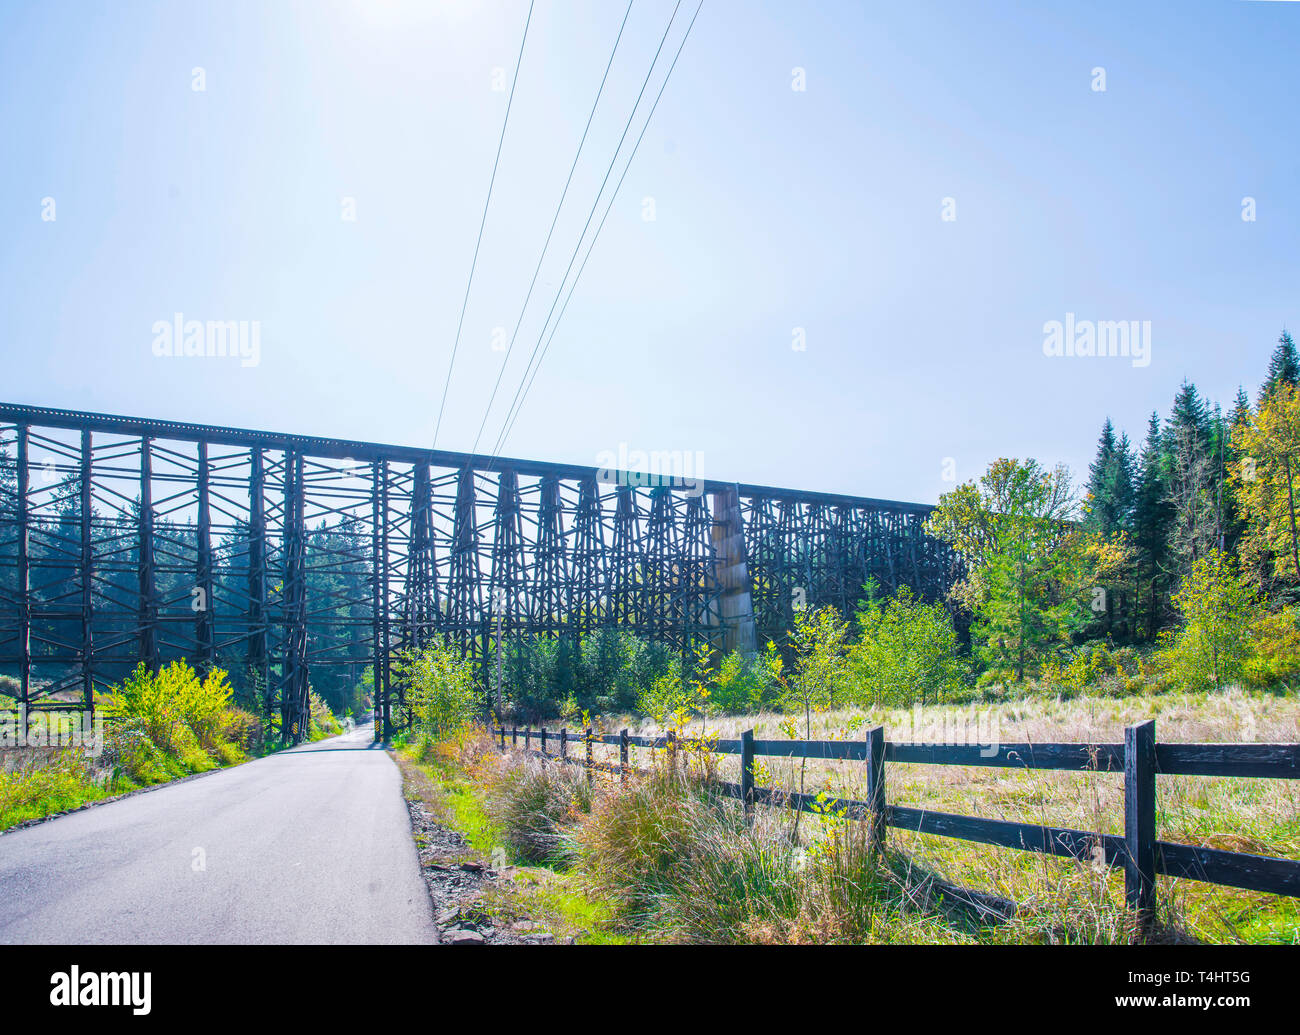 Landscape with a local road passing through the valley under a unique old build existing Holcomb creek wooden train trestle, allowing simultaneous mov Stock Photo